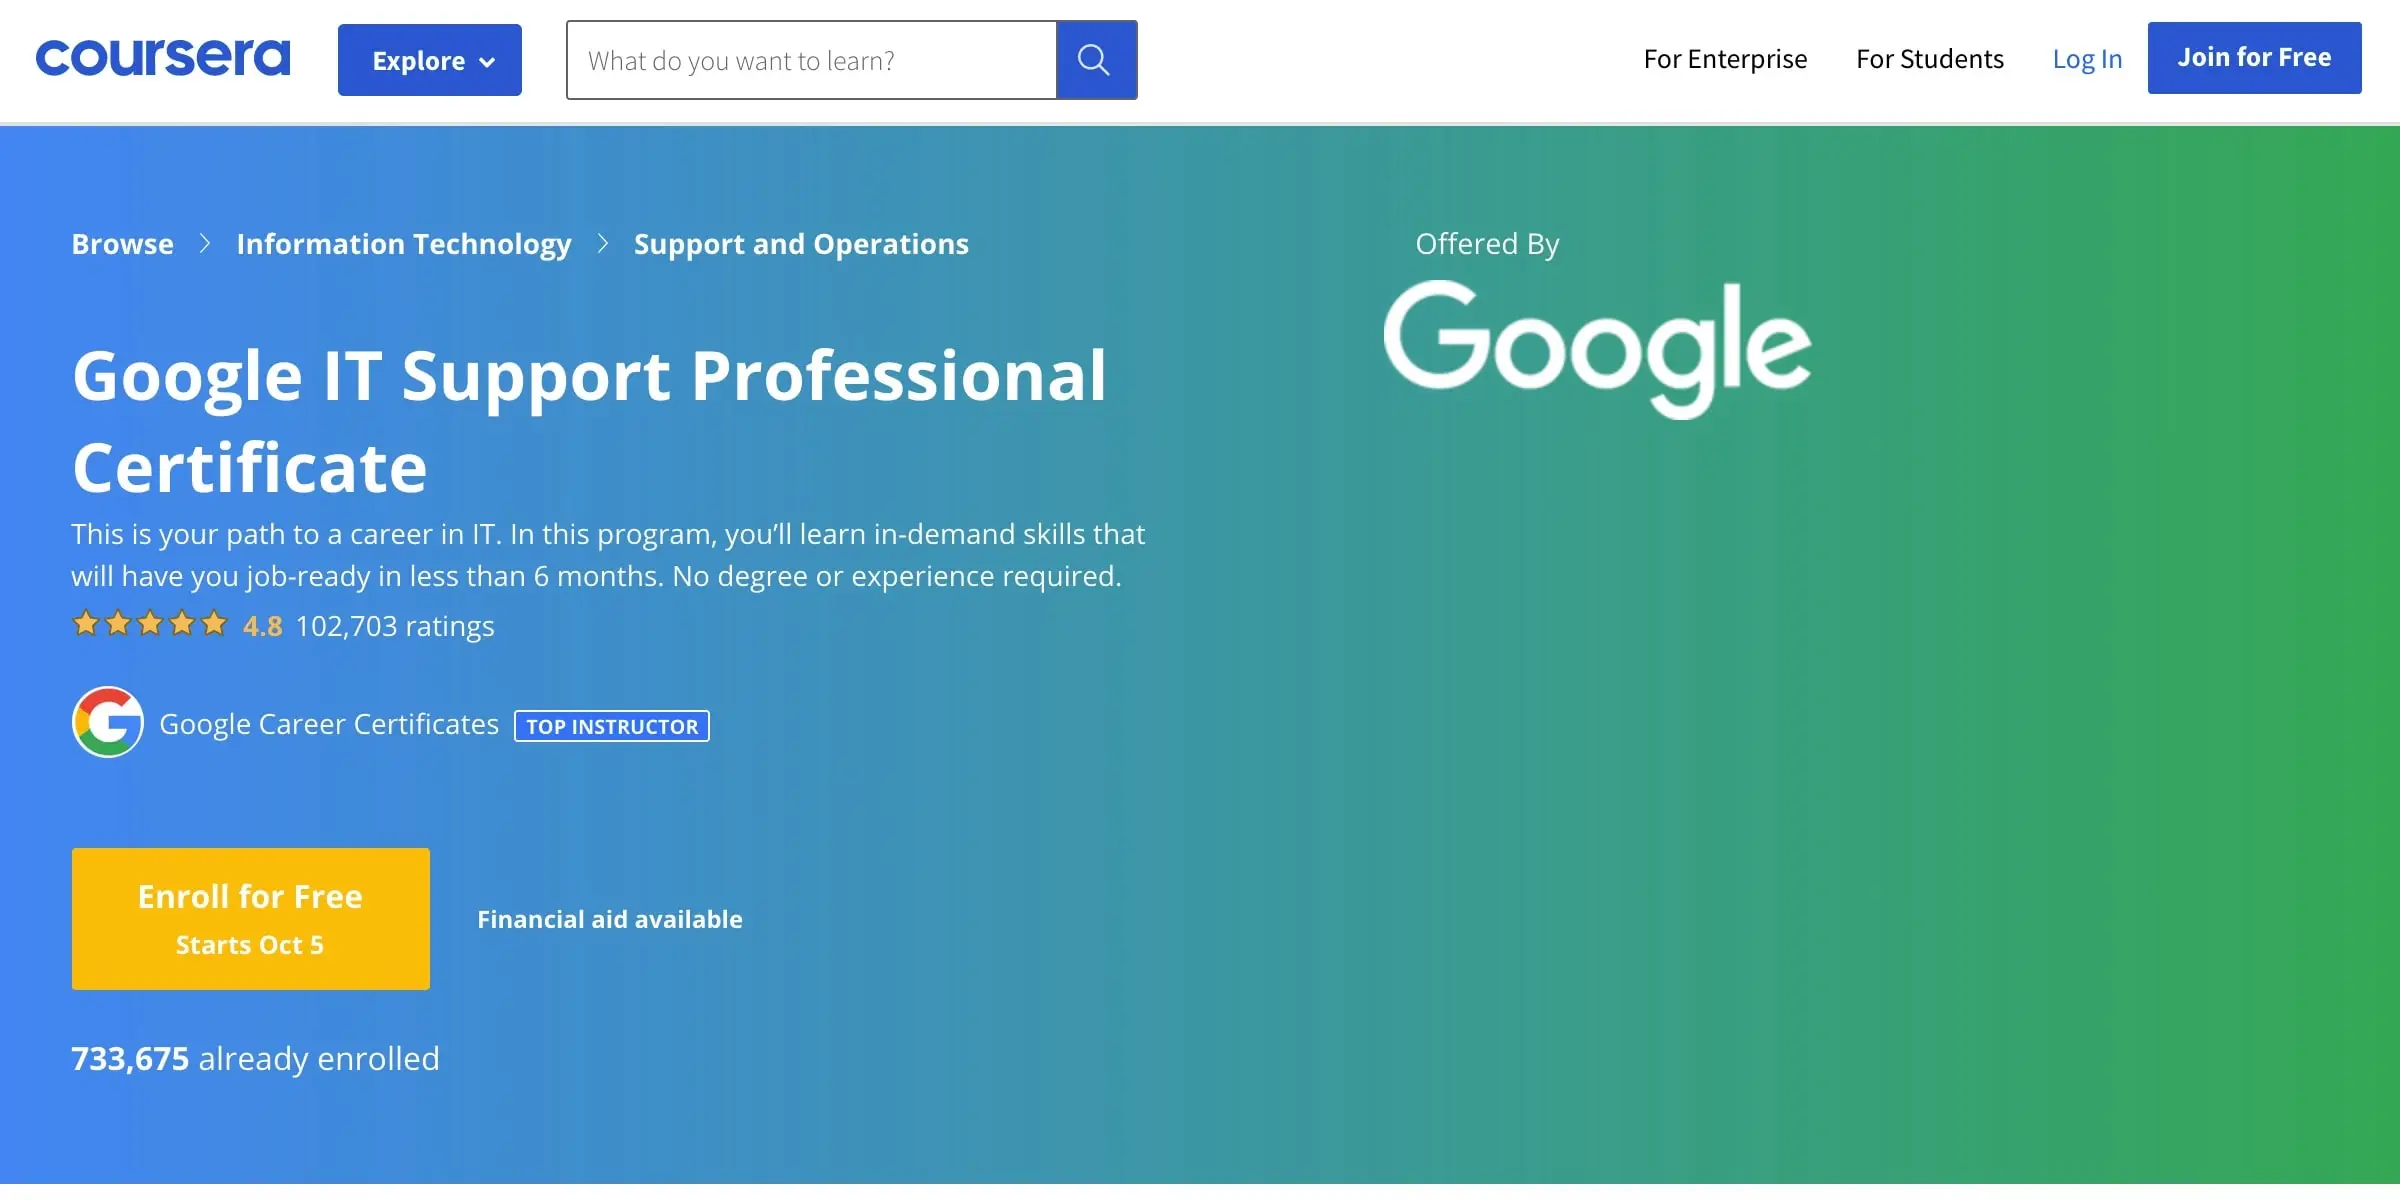 Google IT Support Professional Certificate